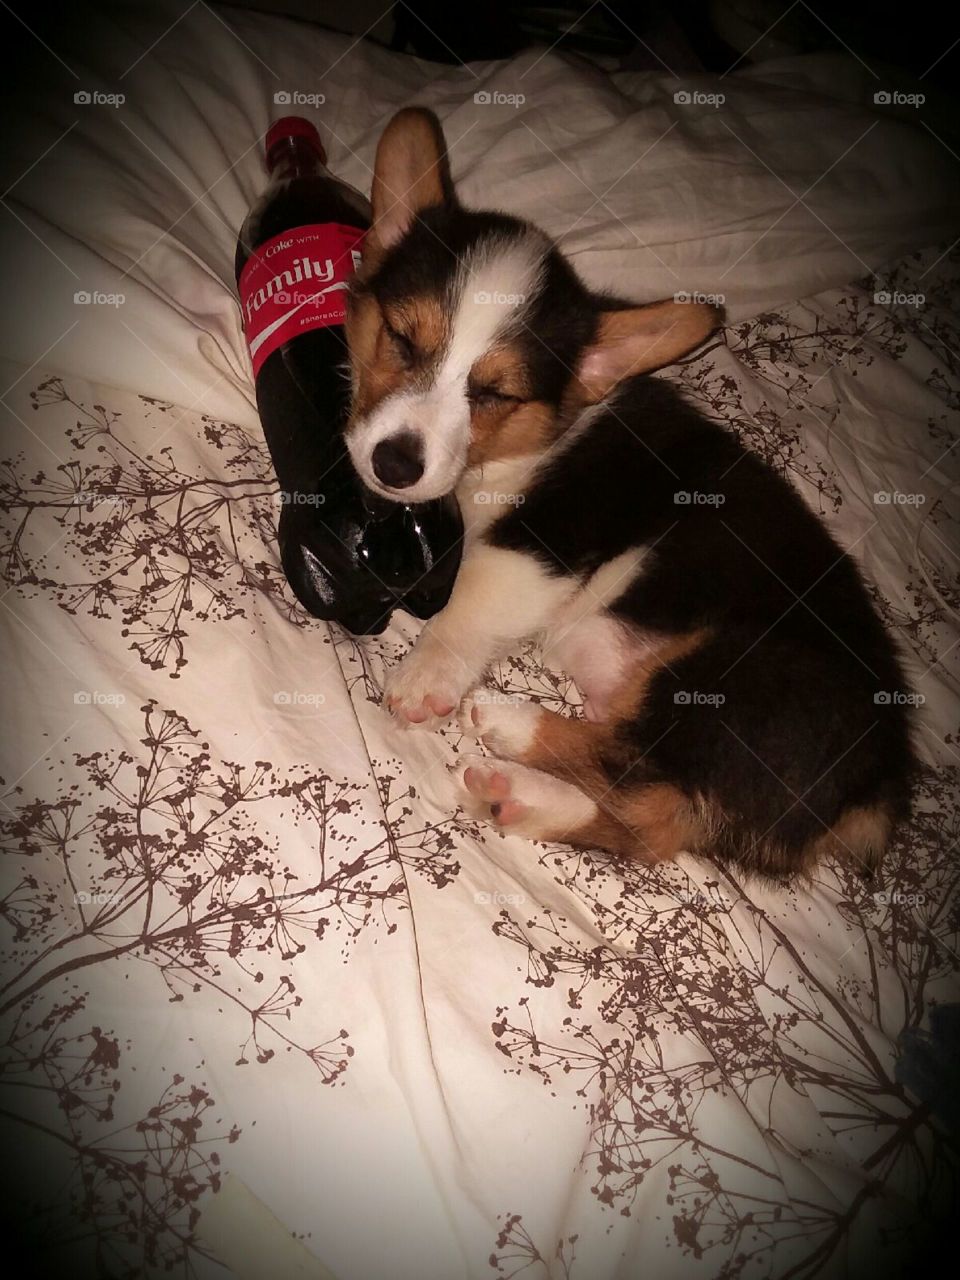 It gets hot out there for little corgis. Sawyer loves to cool off with an ice cold Coca Cola.